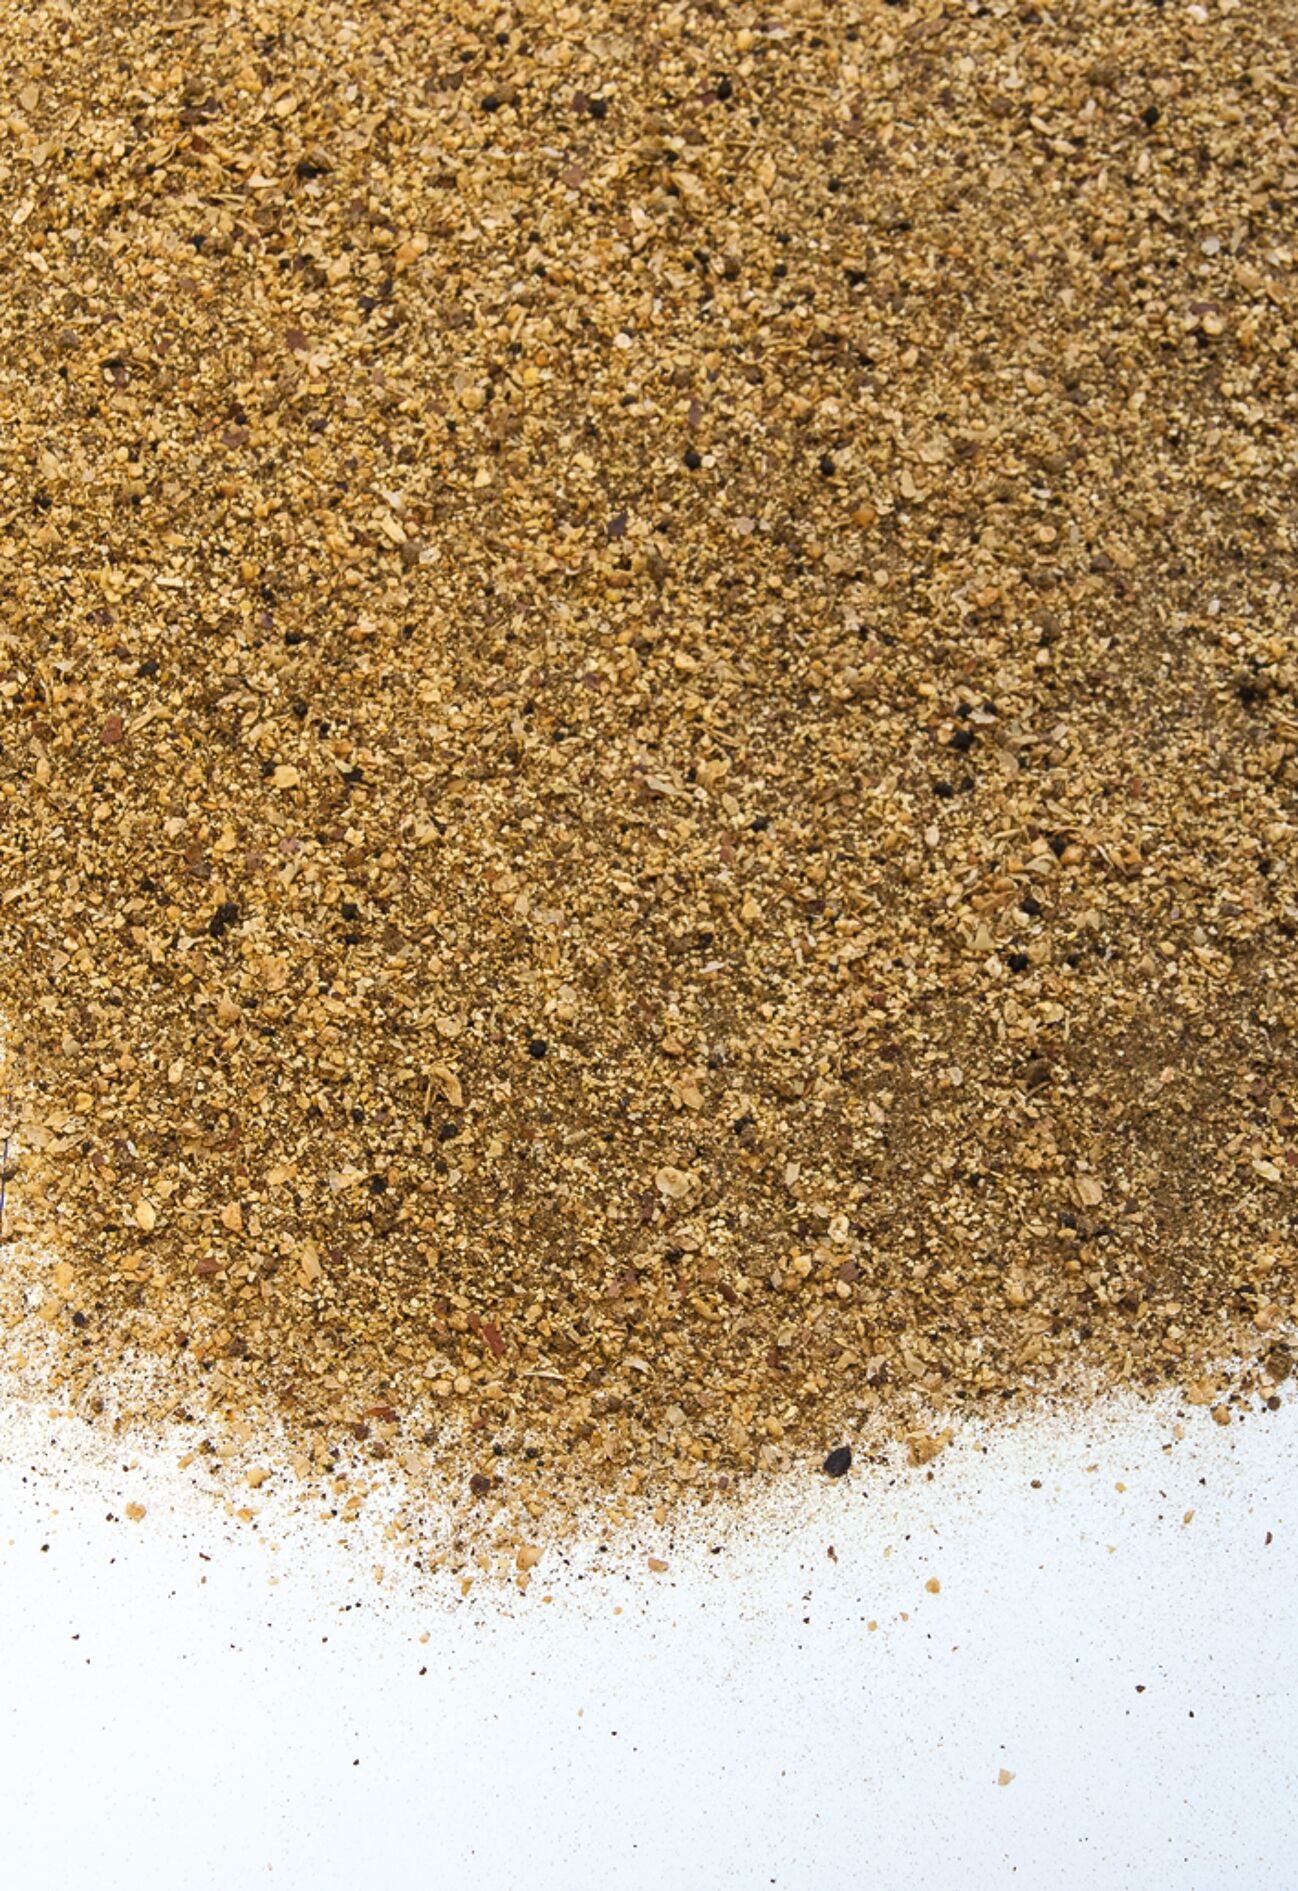 Animal Feed: Types, Ingredients and Manufacturing Process